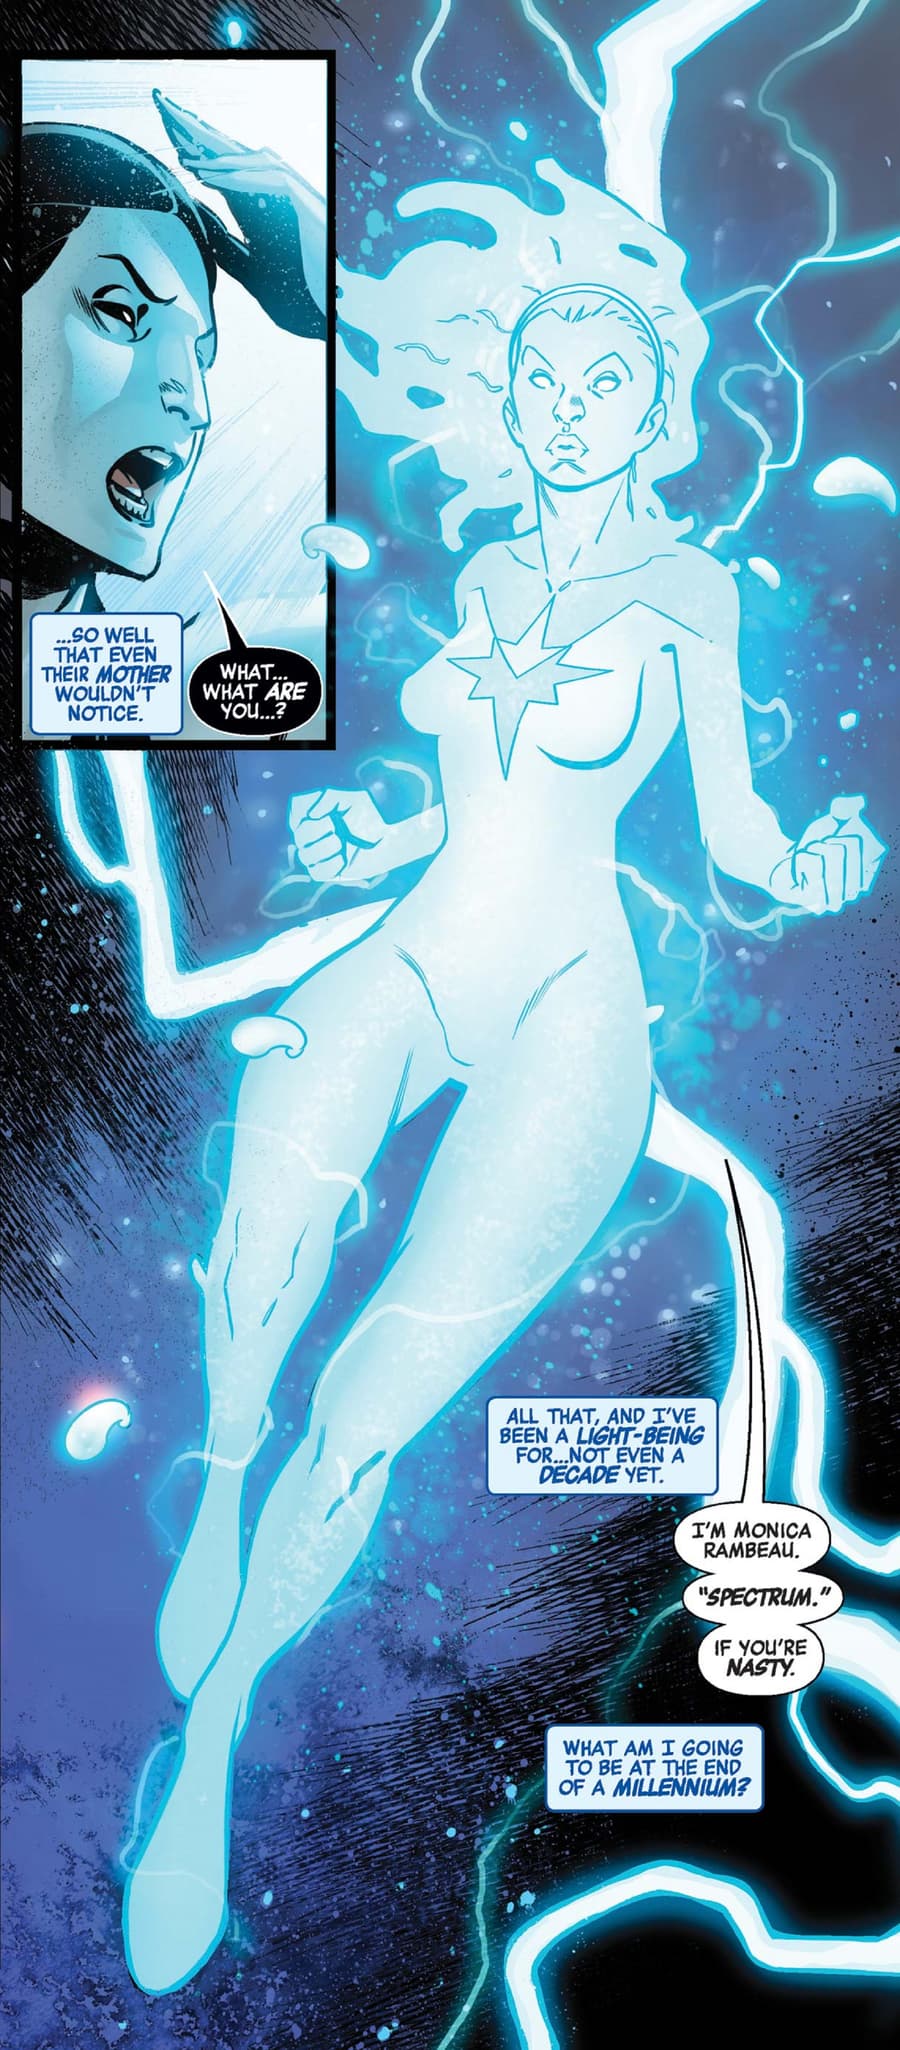 Monica Rambeau gets a new set of powers as a being of light.